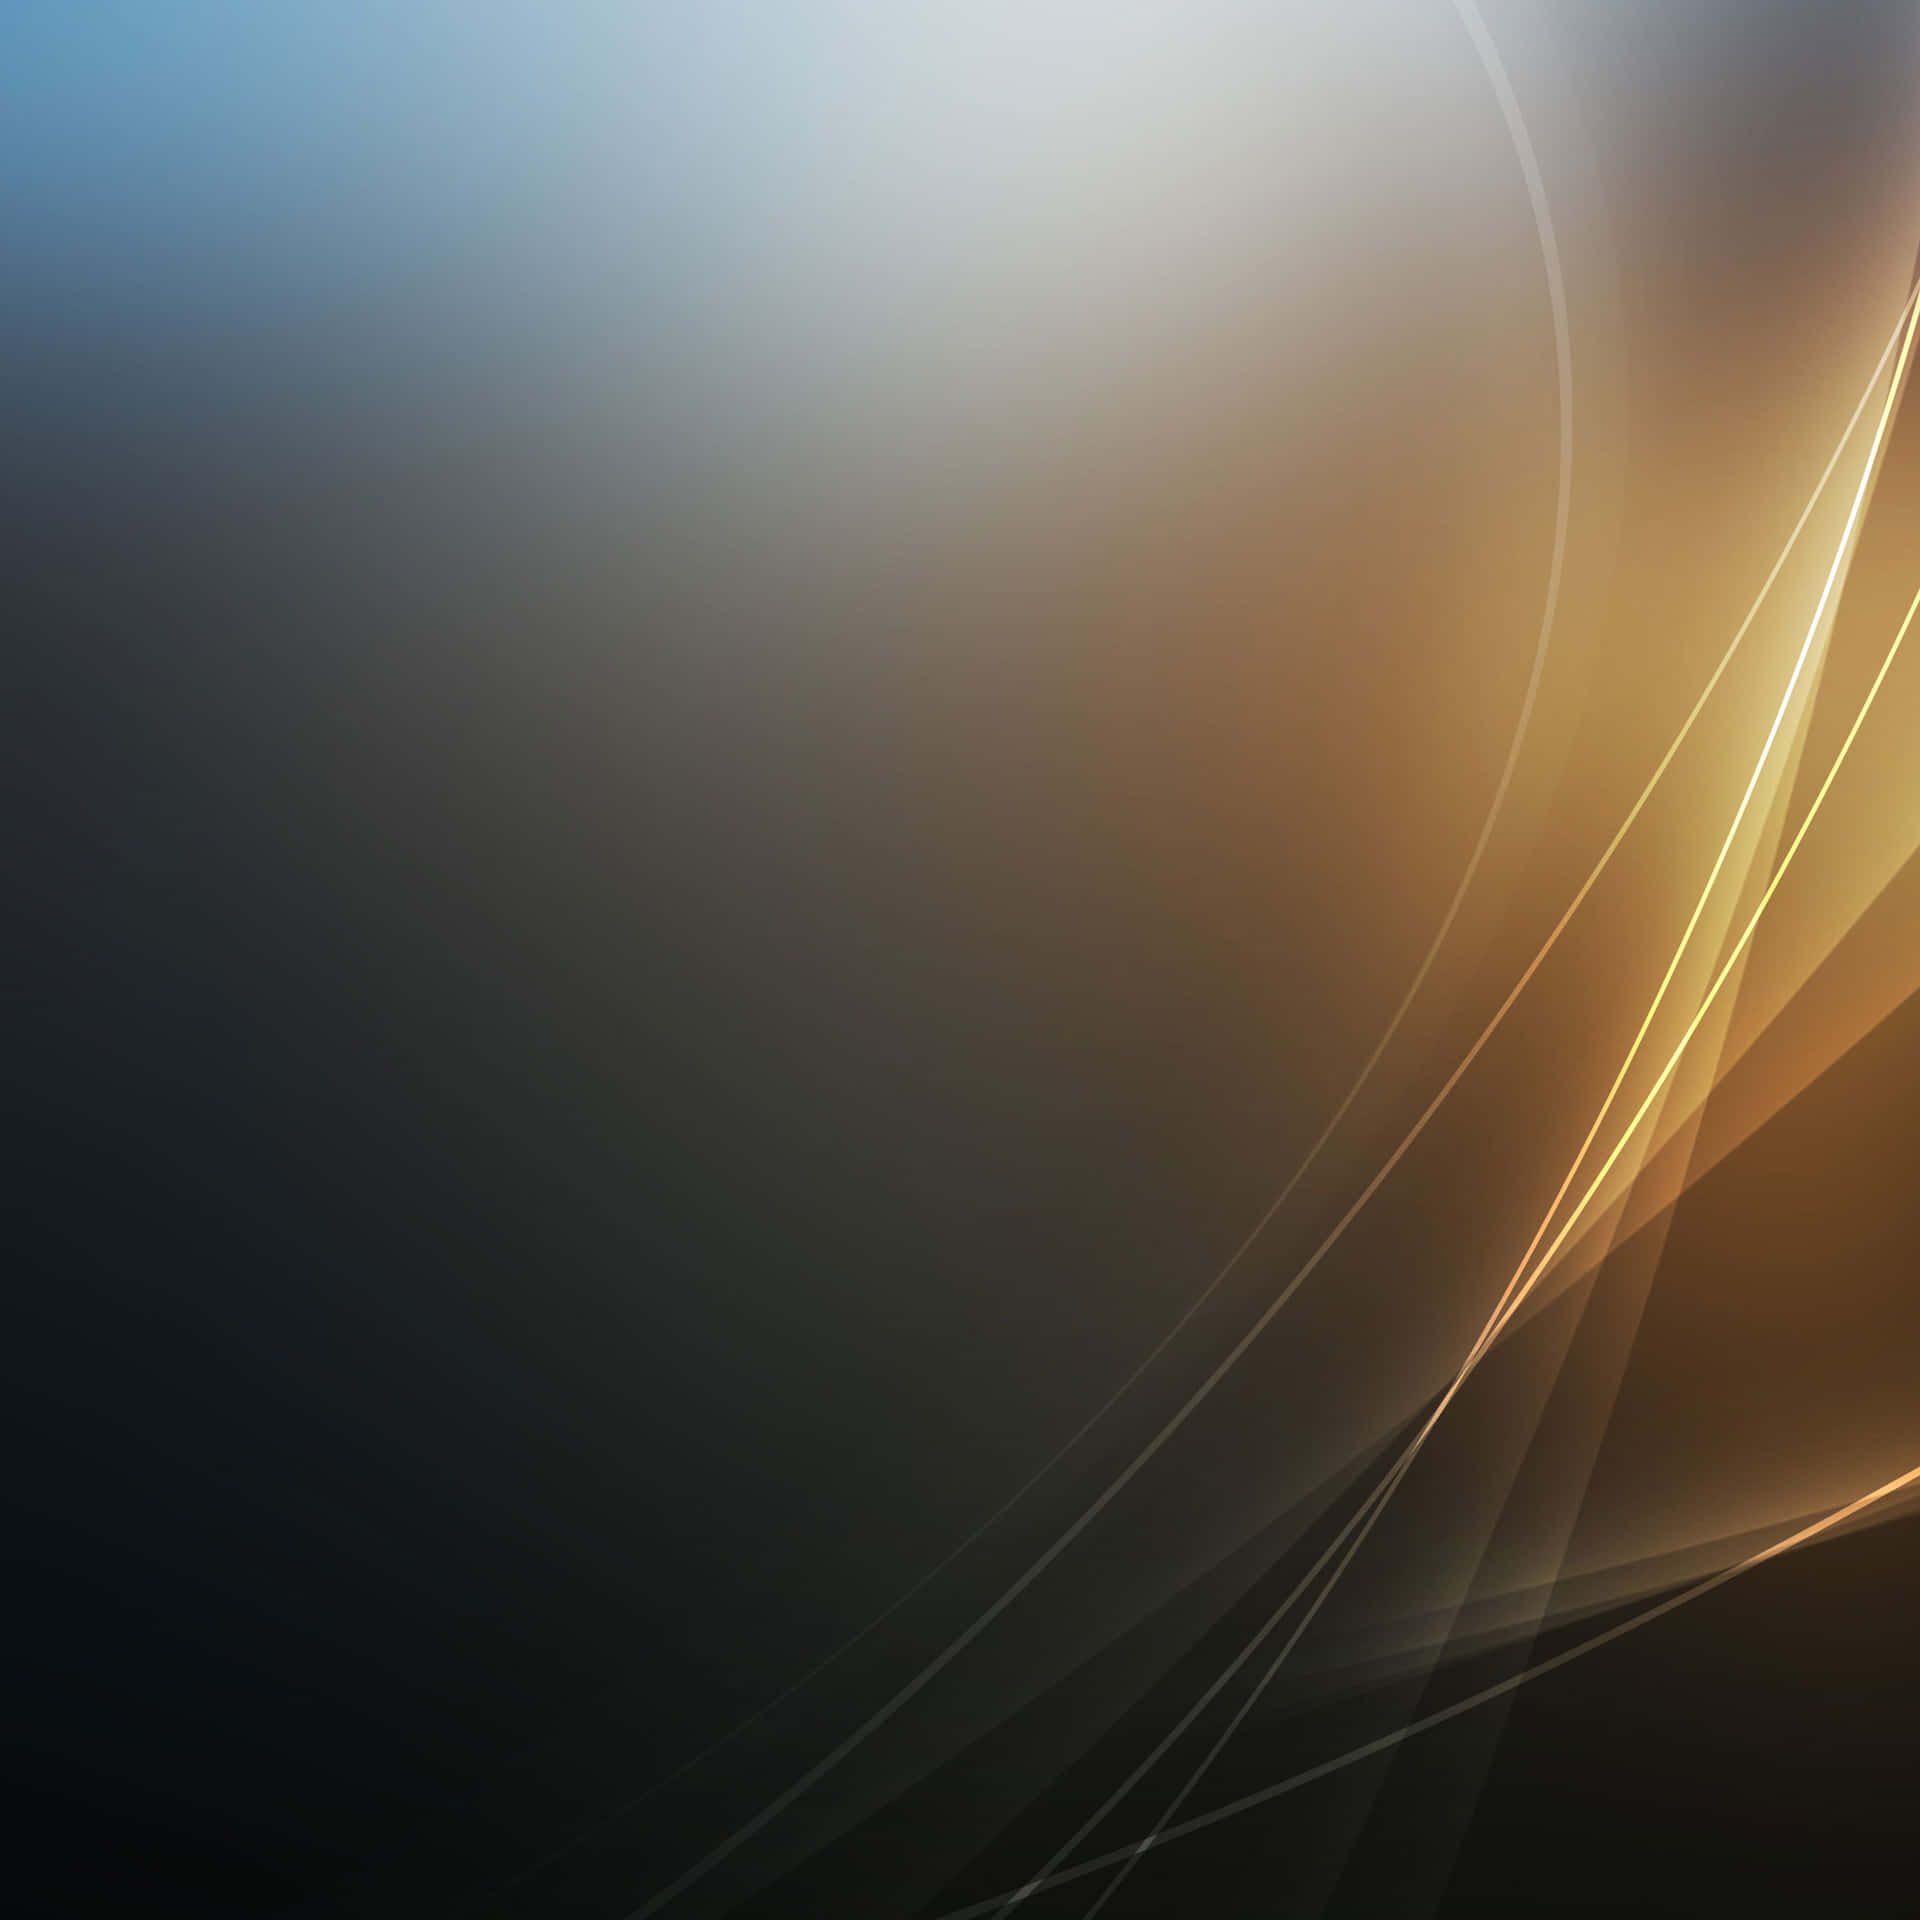 A Black And Gold Abstract Background With A Light Shining On It